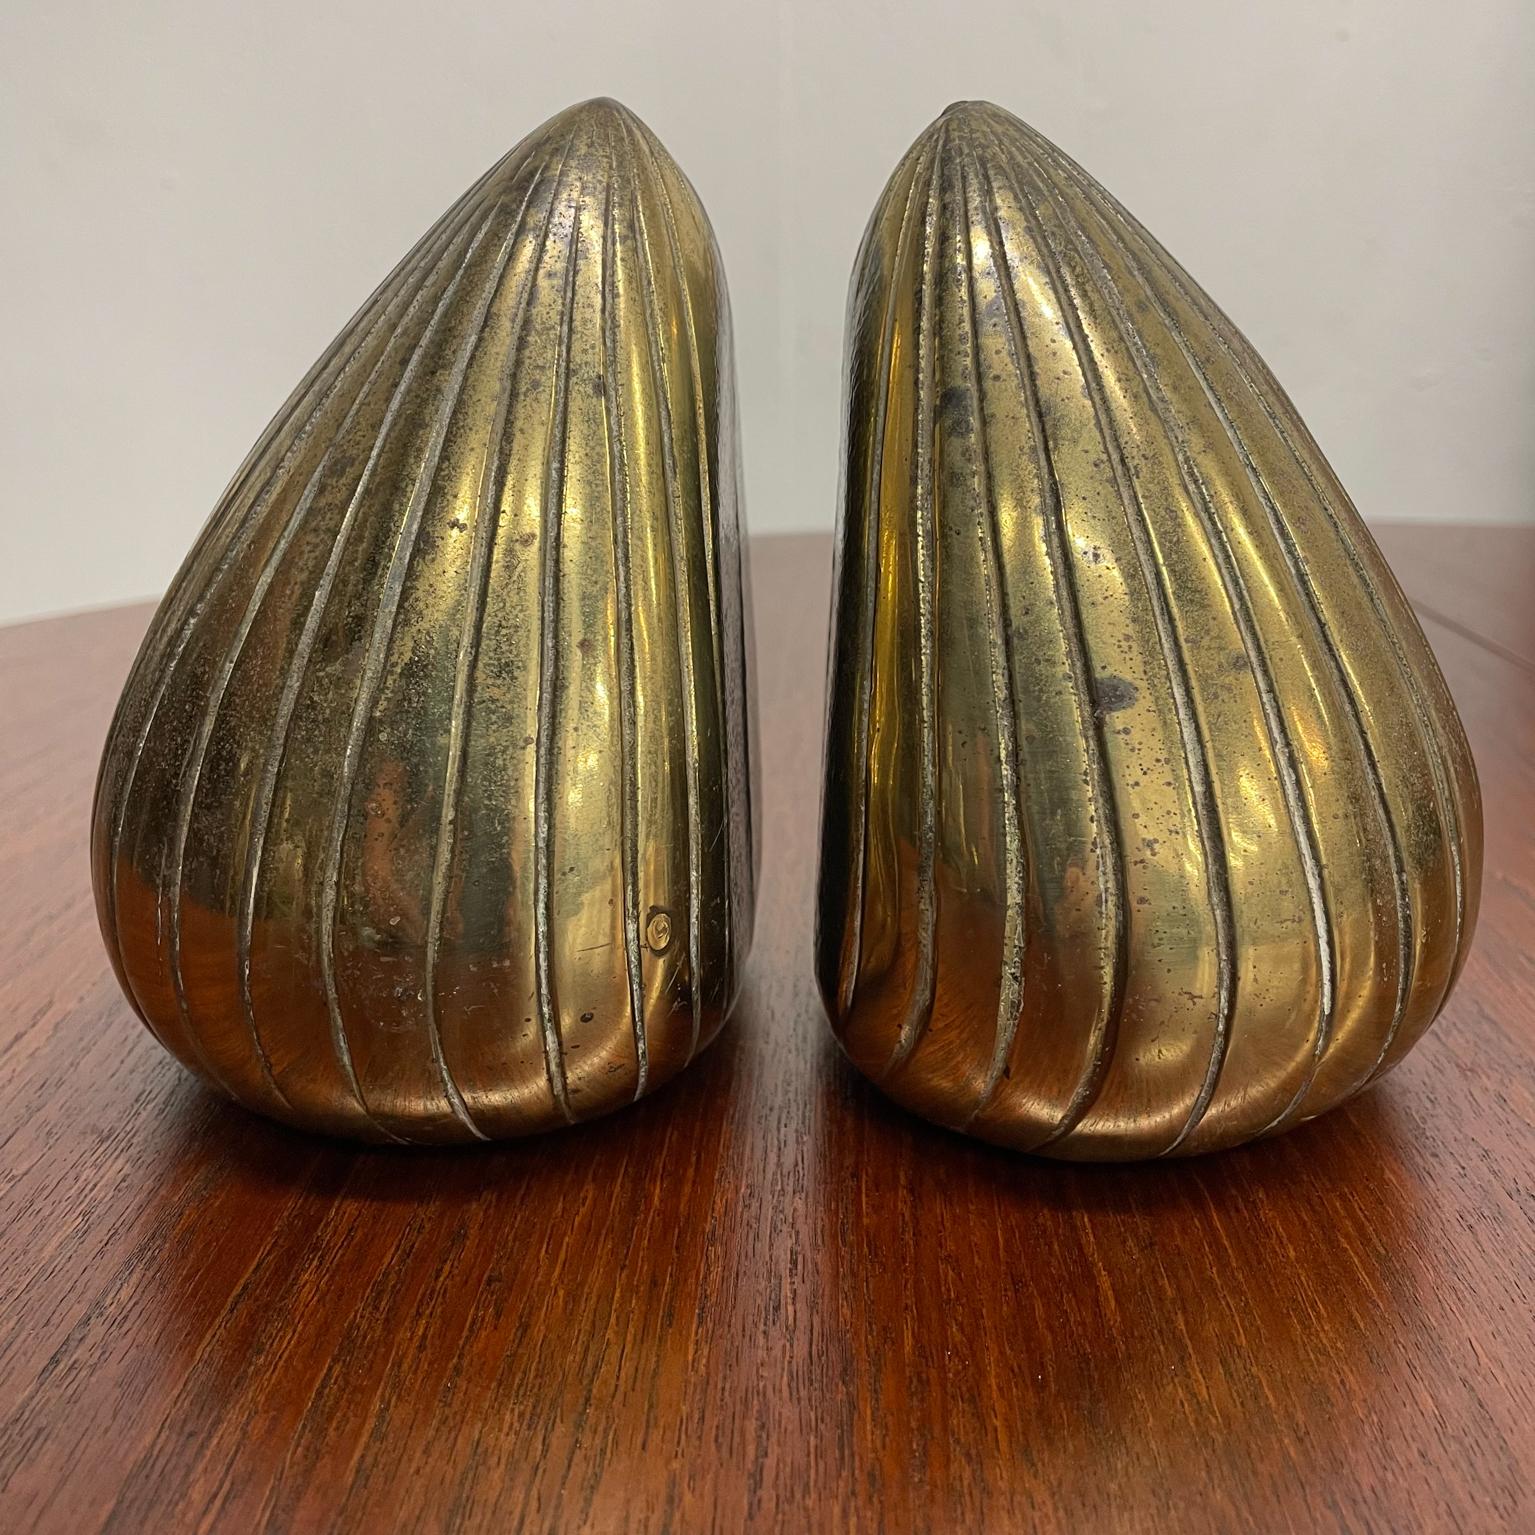 Clam bookends
Ben Seibel for Jenfred-ware sculptural clamshell bookends striking Mid-Century Modern design 1950s
Original label present
Made in brass plate
Measures: 5.63 H x 5 W x 4 D inches
Original preowned vintage unrestored condition.